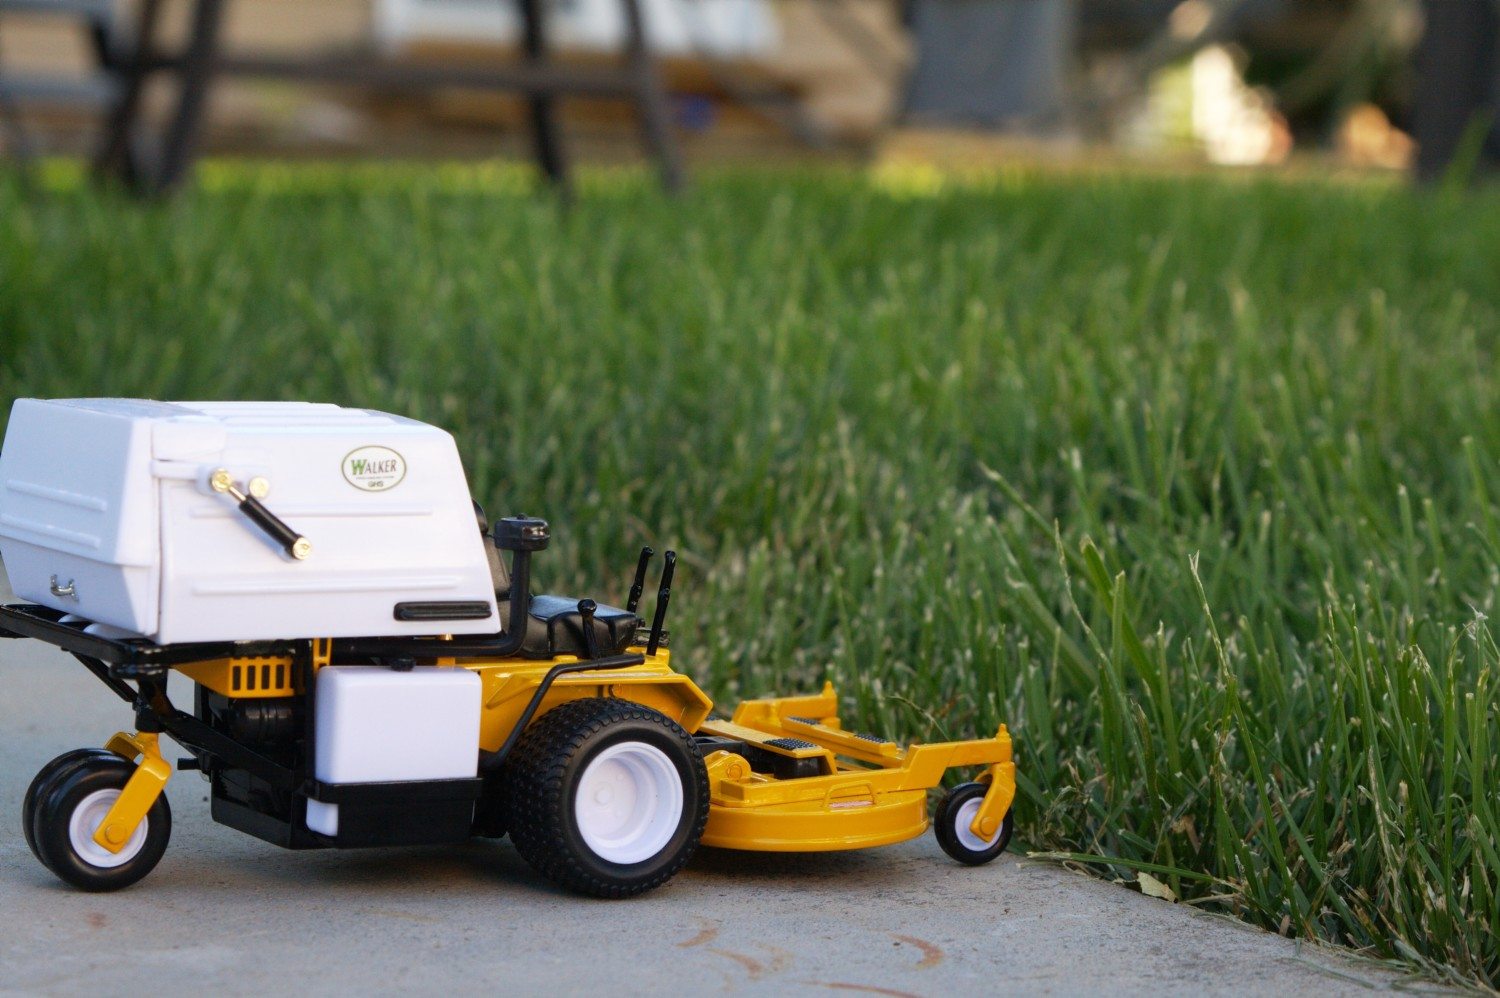 hired help makes lawn care easier